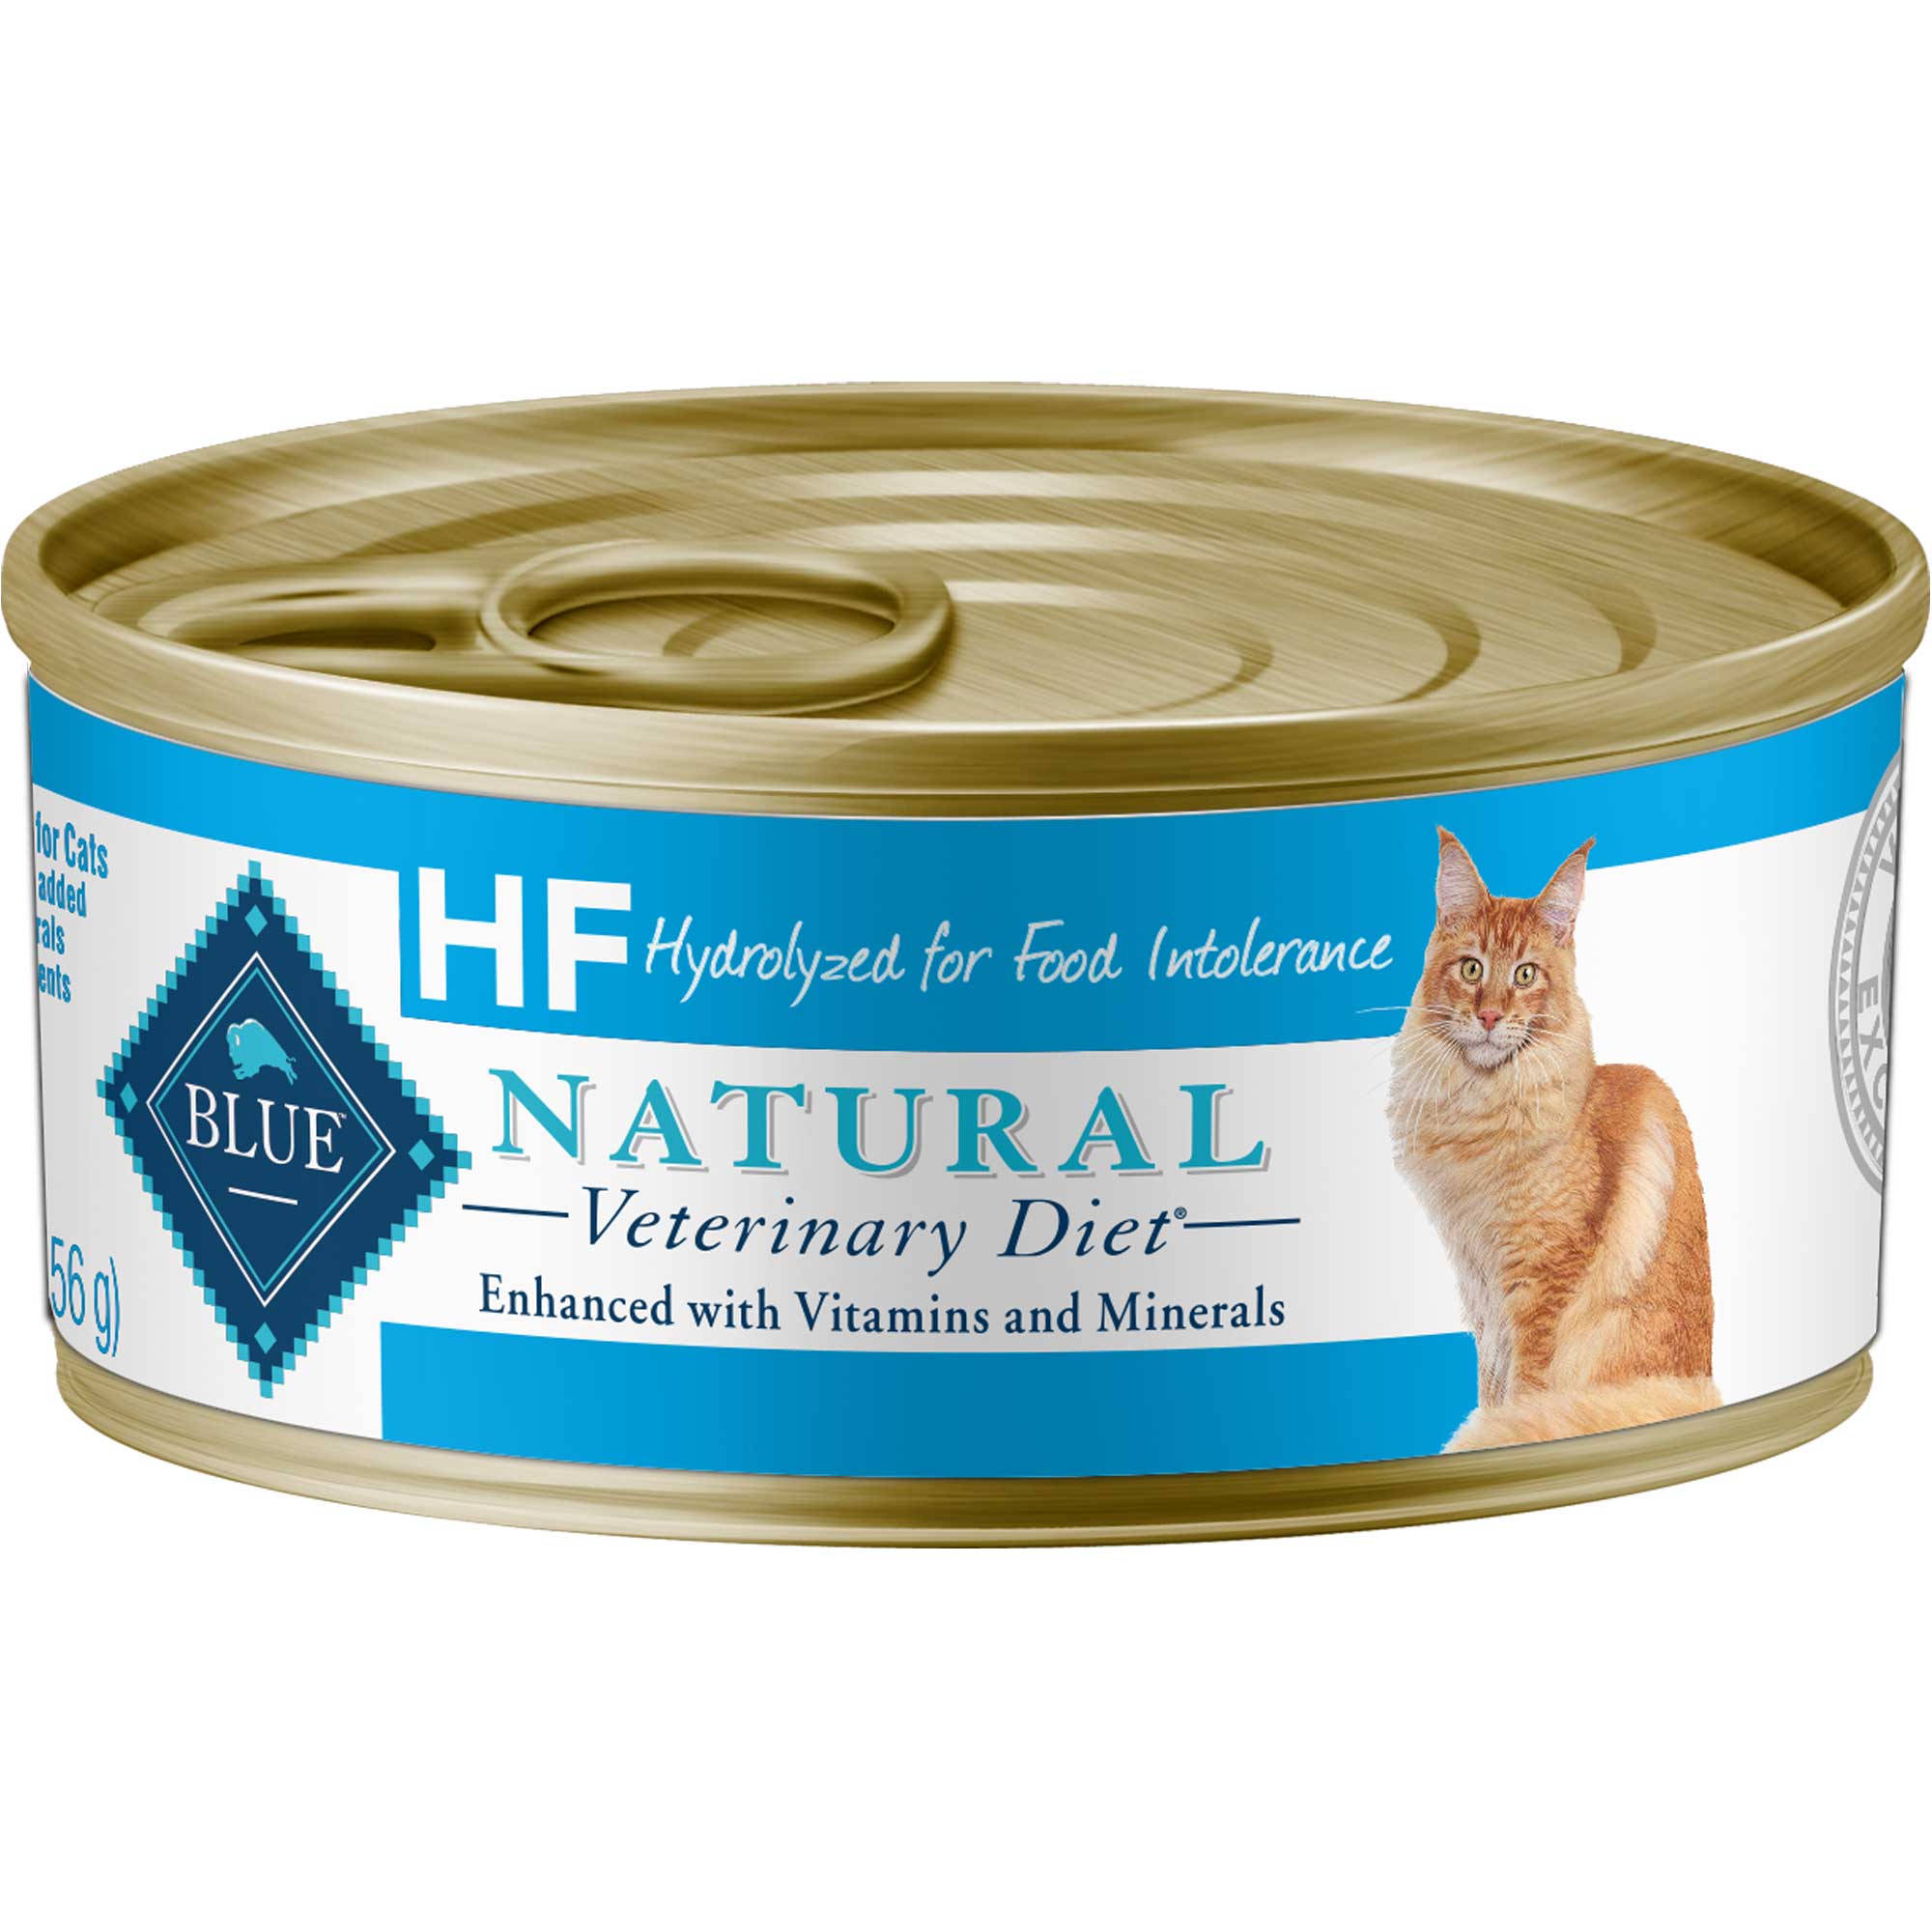 BLUE Natural Veterinary Diet HF Hydrolyzed for Food Intolerance Grain-Free Wet Cat Food Usage